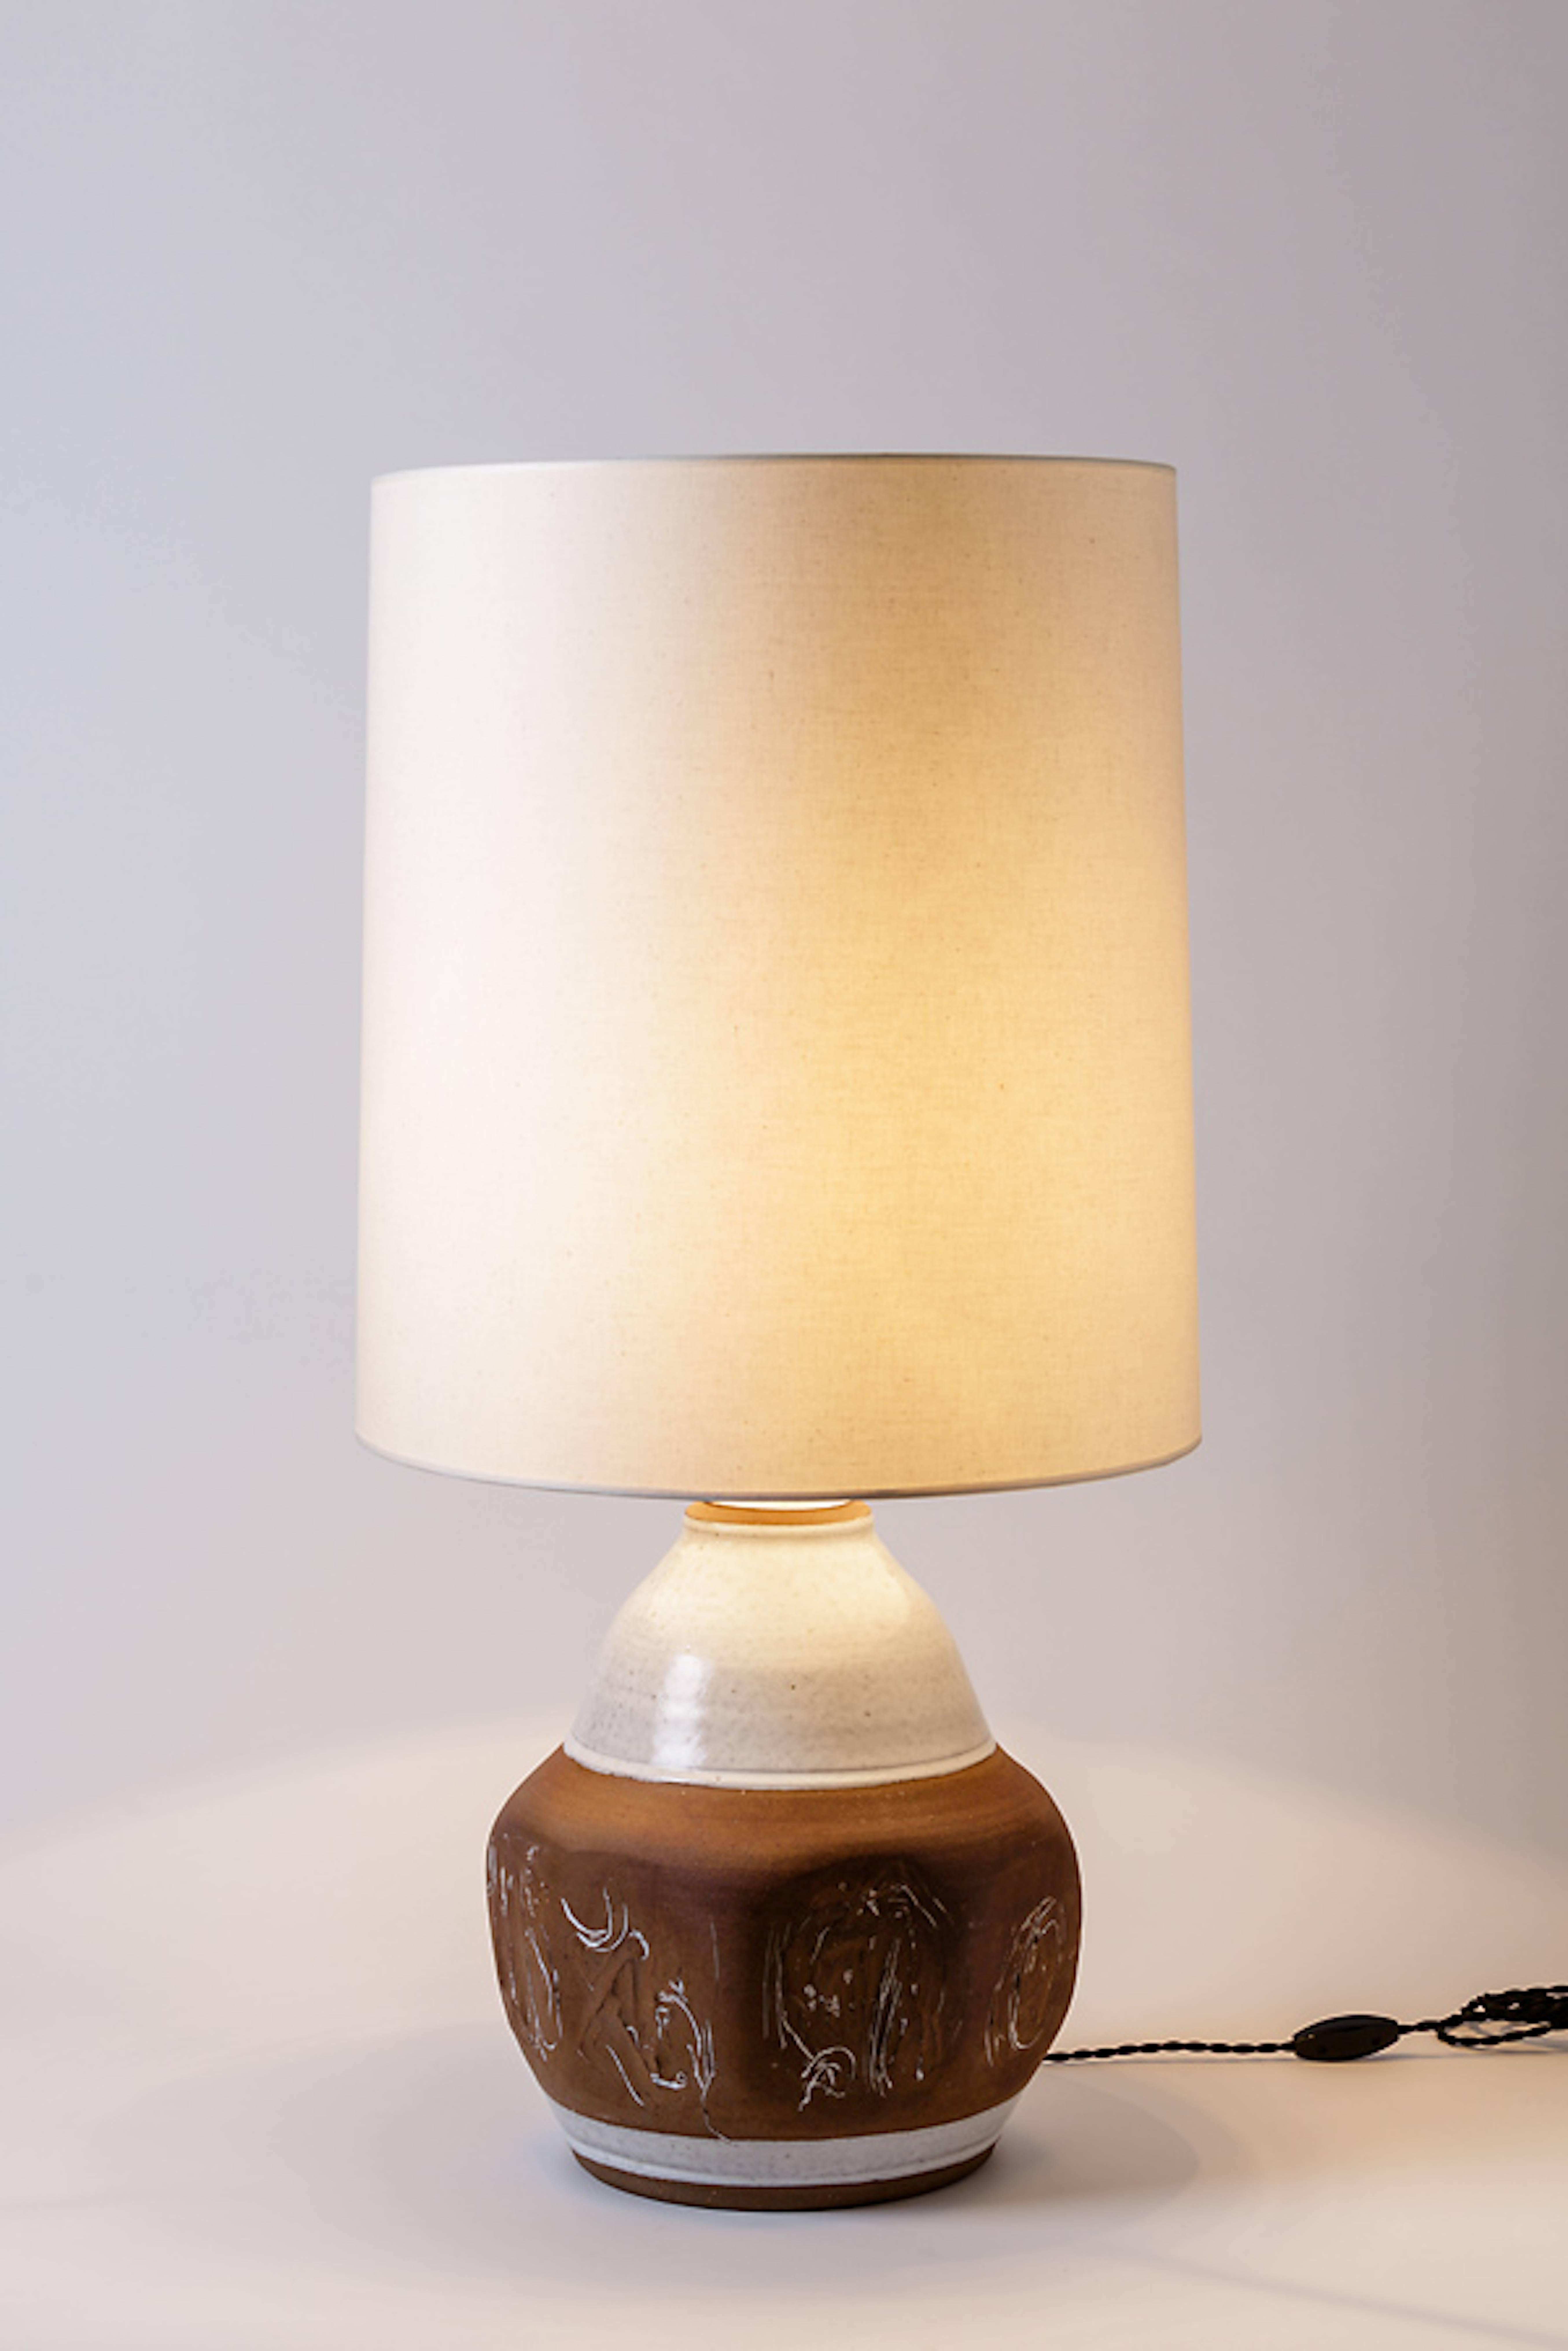 Mid-Century Modern White and Brown Stoneware Ceramic Table Lamp by Roger Collet, circa 1970 For Sale